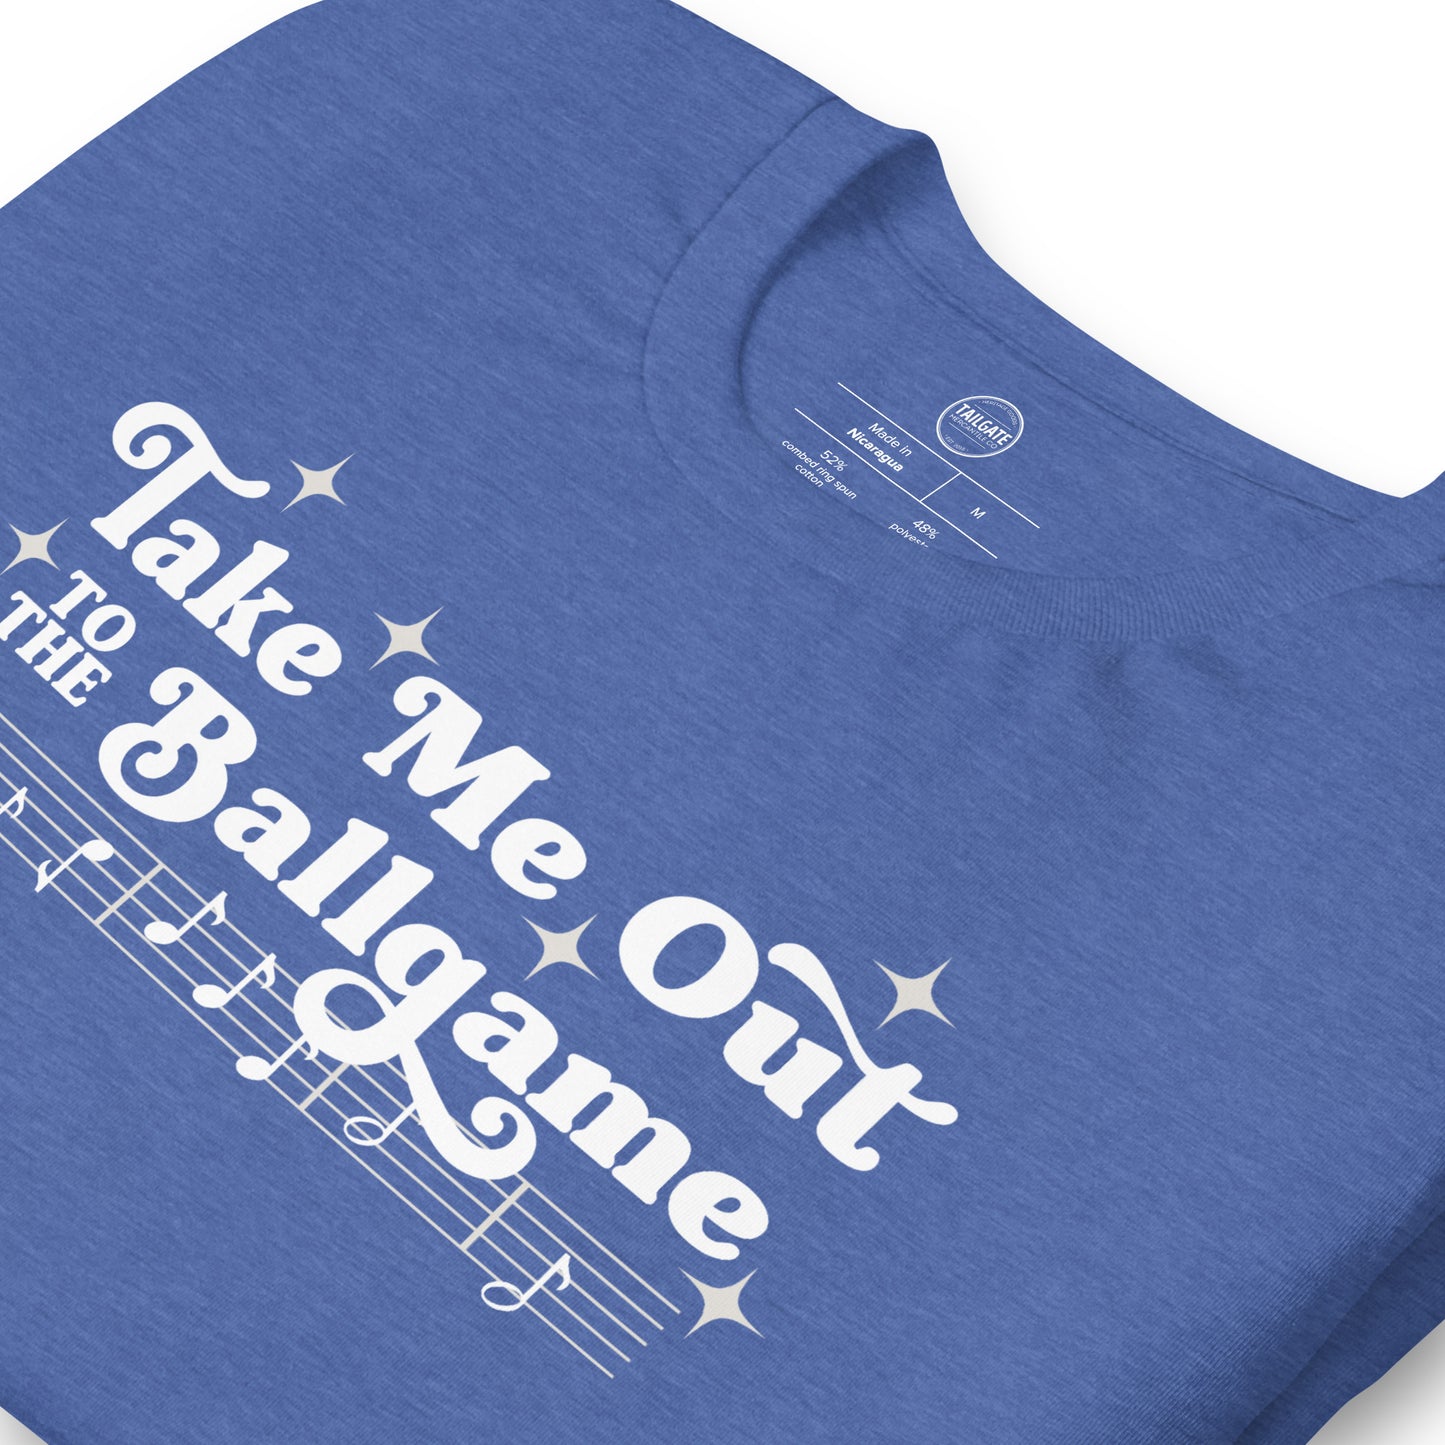 Close up image of heather royal blue t-shirt with design of "Take Me Out to the Ballgame" with coordinating musical notes in white located on centre chest. This design is exclusive to Tailgate Mercantile and available only online.